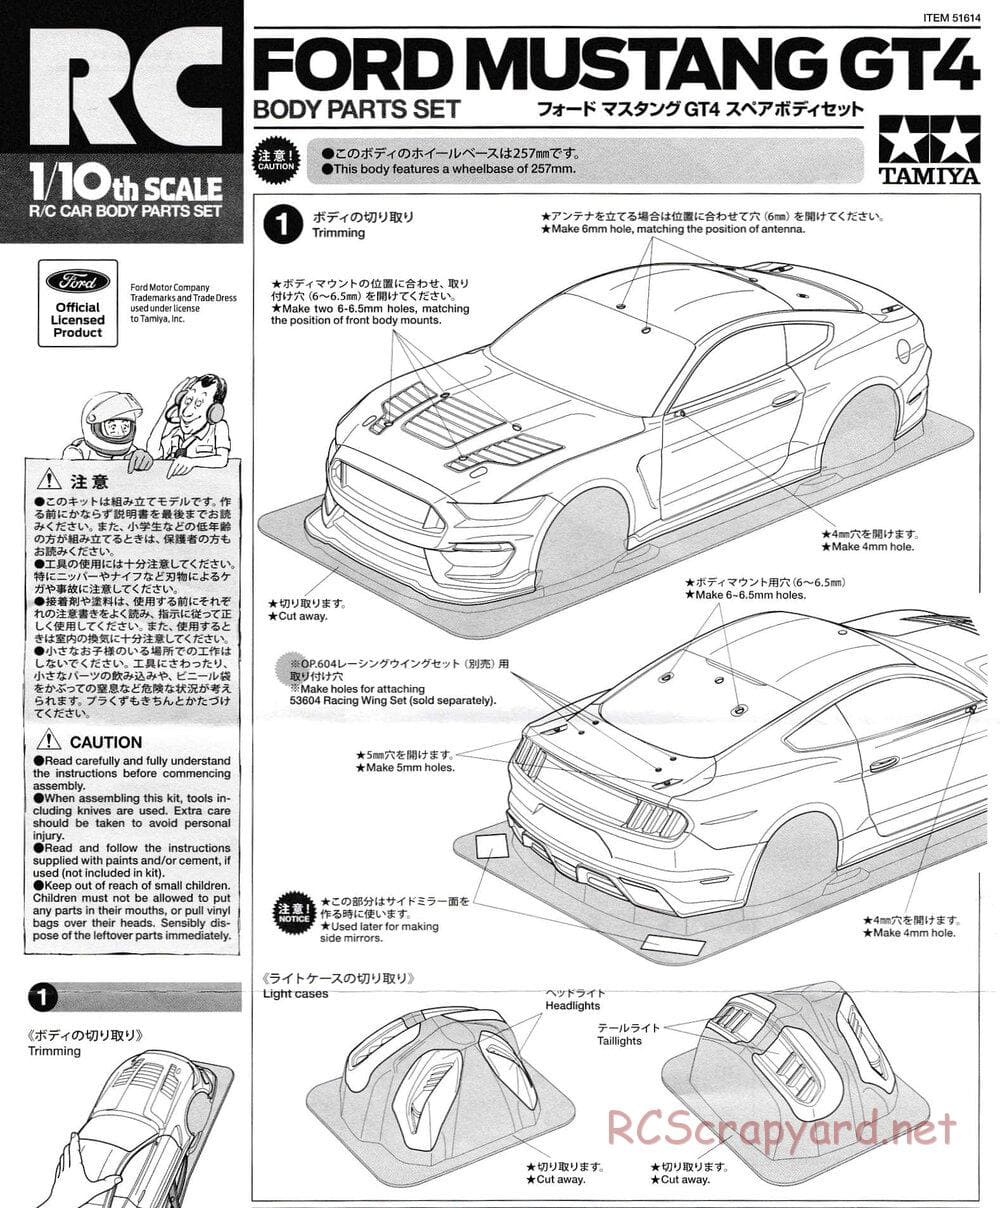 Tamiya - Ford Mustang GT4 - TT-02 Chassis - Body Manual - Page 1